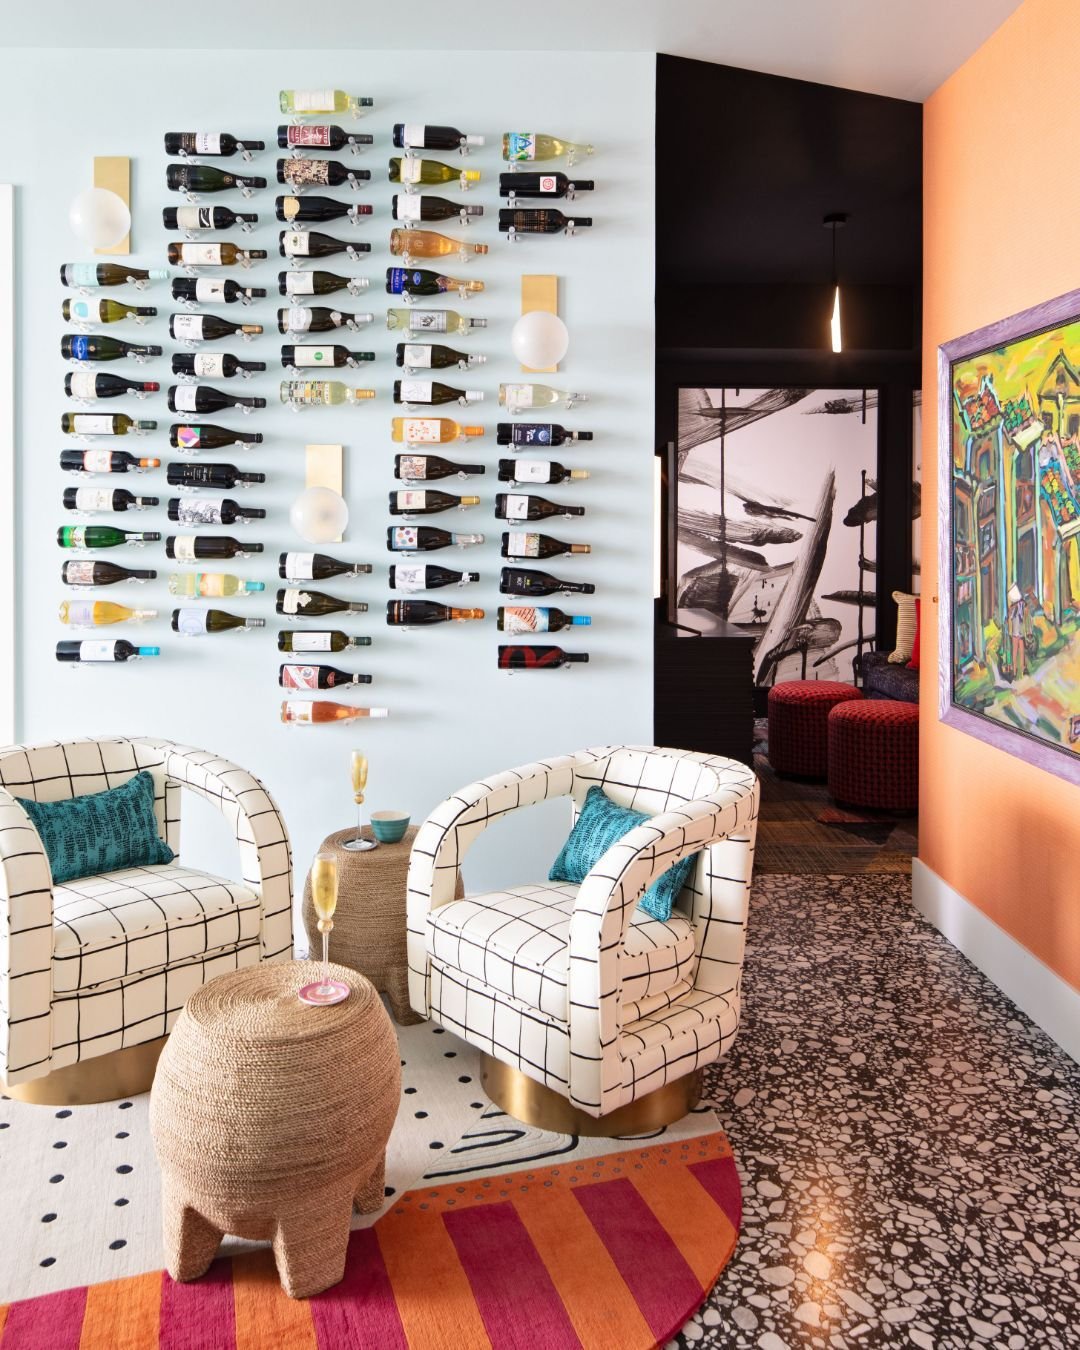 The homeowners for this project sent us three paintings from their art collection for inspiration and gave us complete freedom to design their space. That gave us some insight into their personalities, and we took it as a green light to push the boun